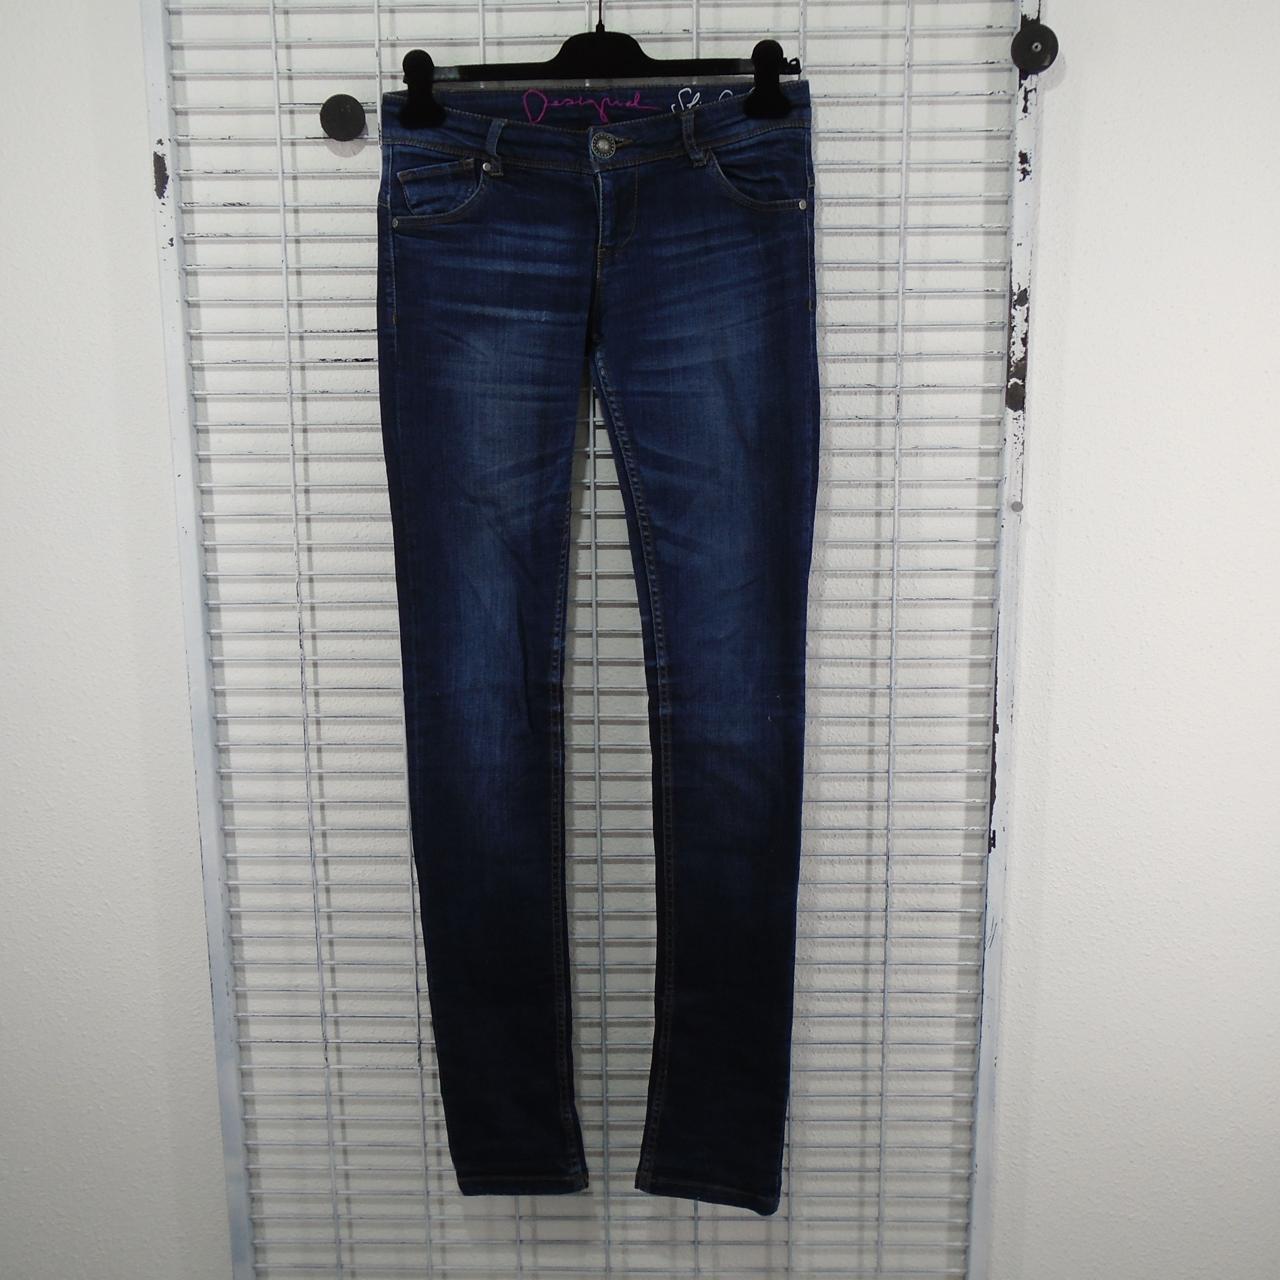 Women's Jeans Desigual. Blue. S. Used. Good